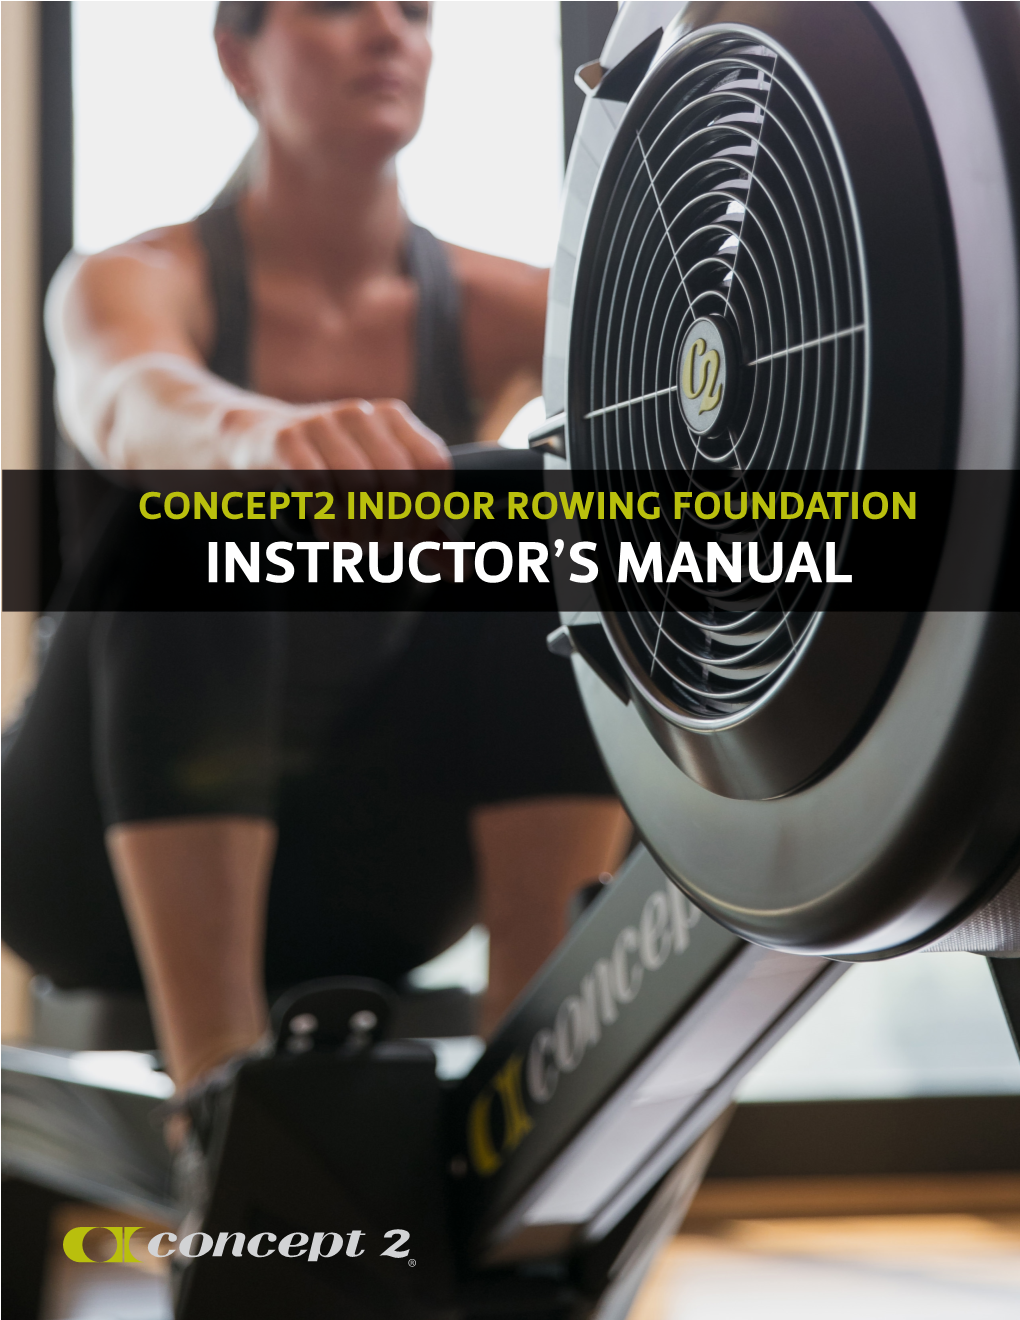 Concept2 Indoor Rowing Foundation Instructor’S Manual